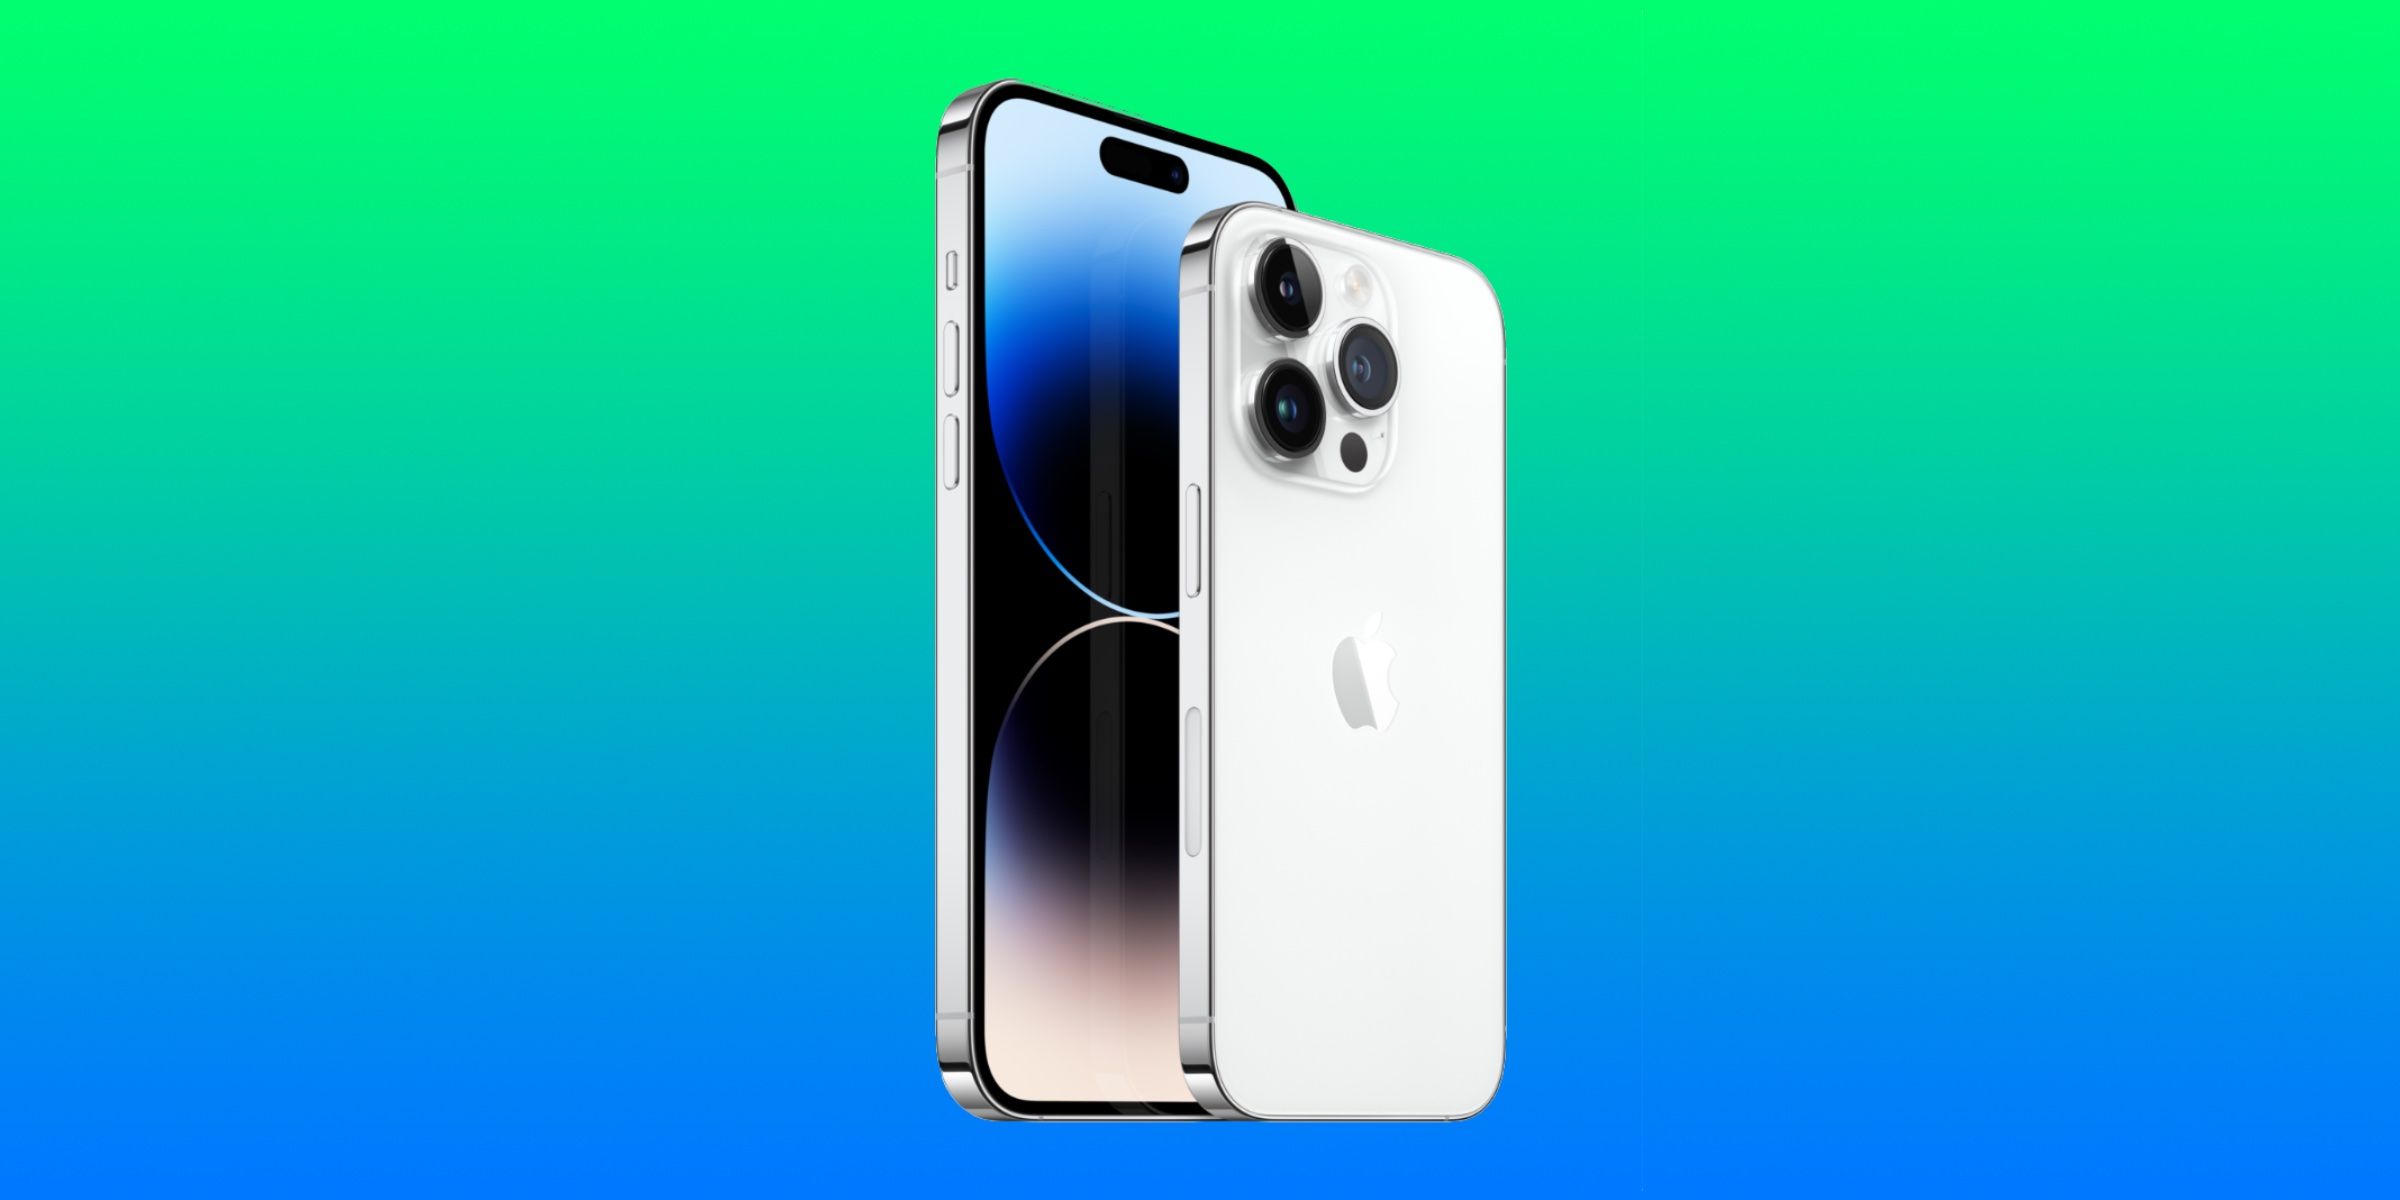 Promotional image for the iPhone 14 Pro Series.